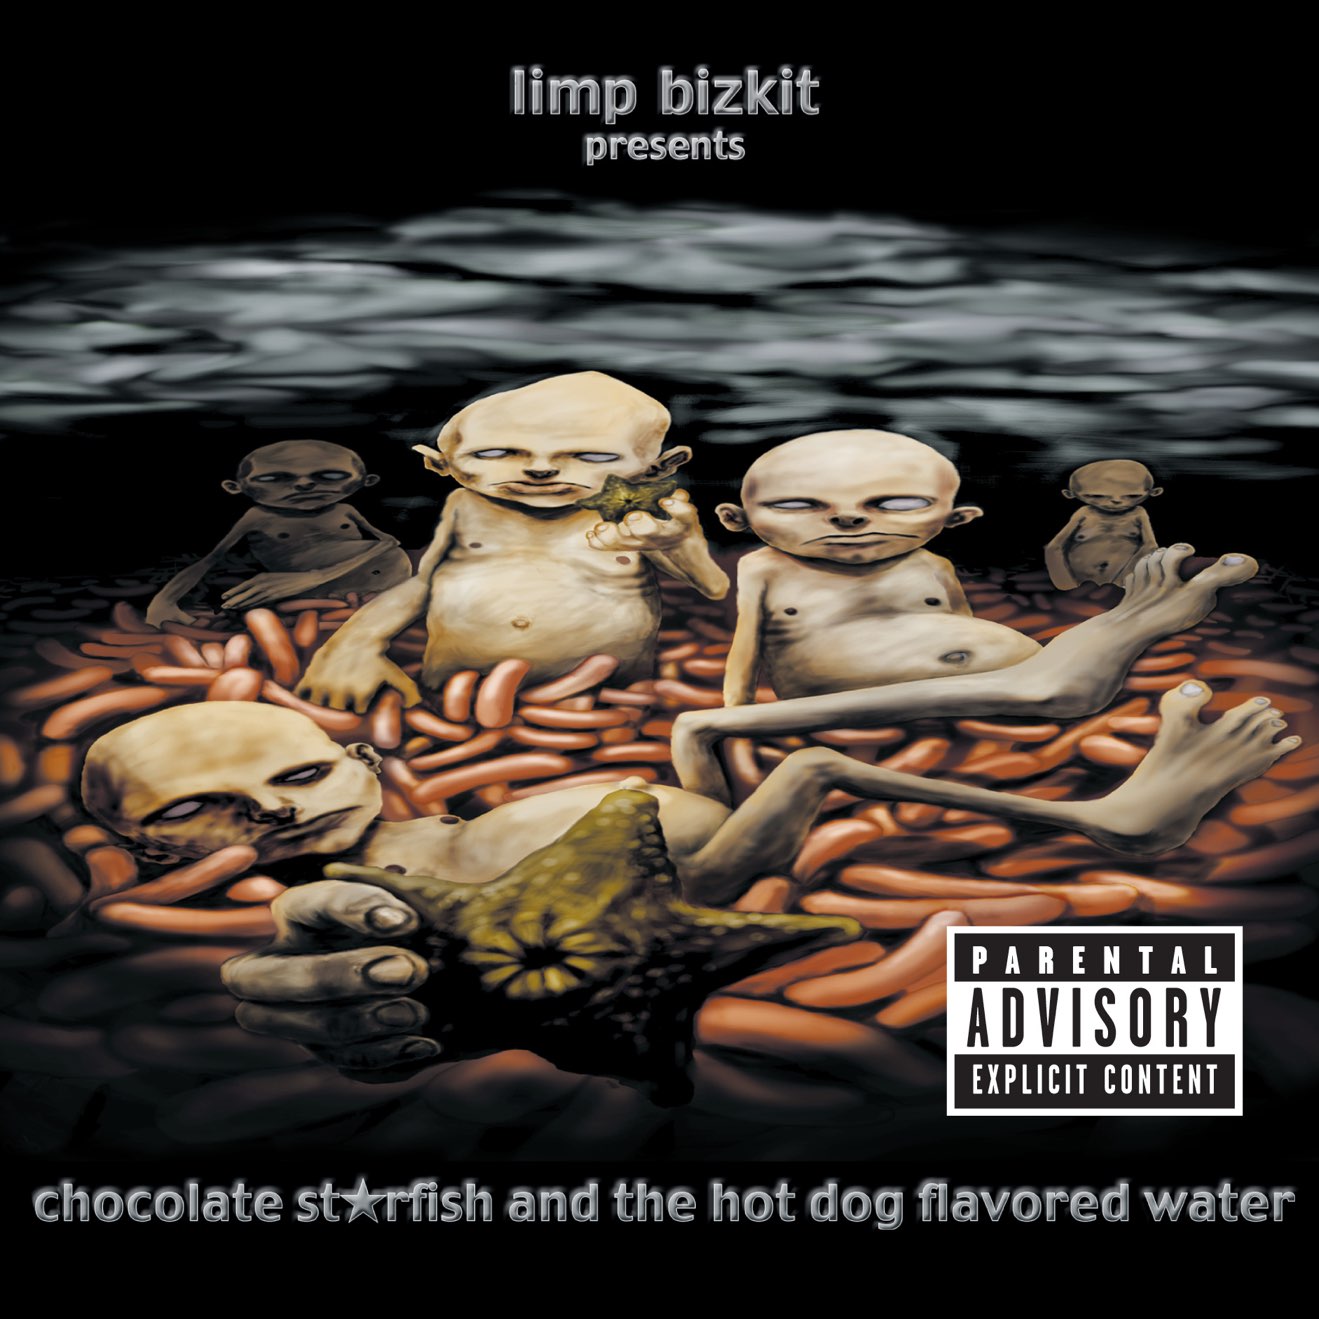 Limp Bizkit – Chocolate Starfish and the Hot Dog Flavored Water (2000) [iTunes Match M4A]